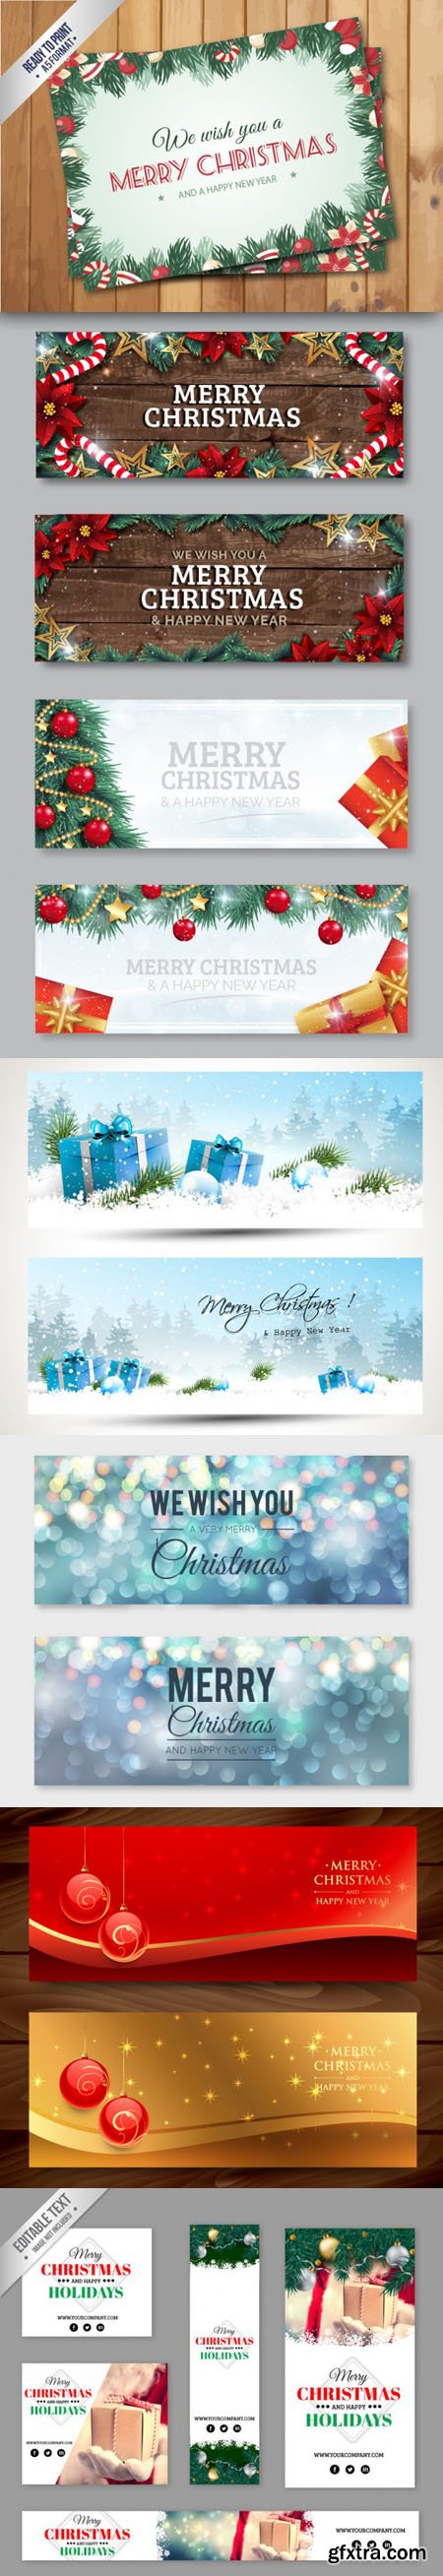 Christmas Banners and Cards Design Vector